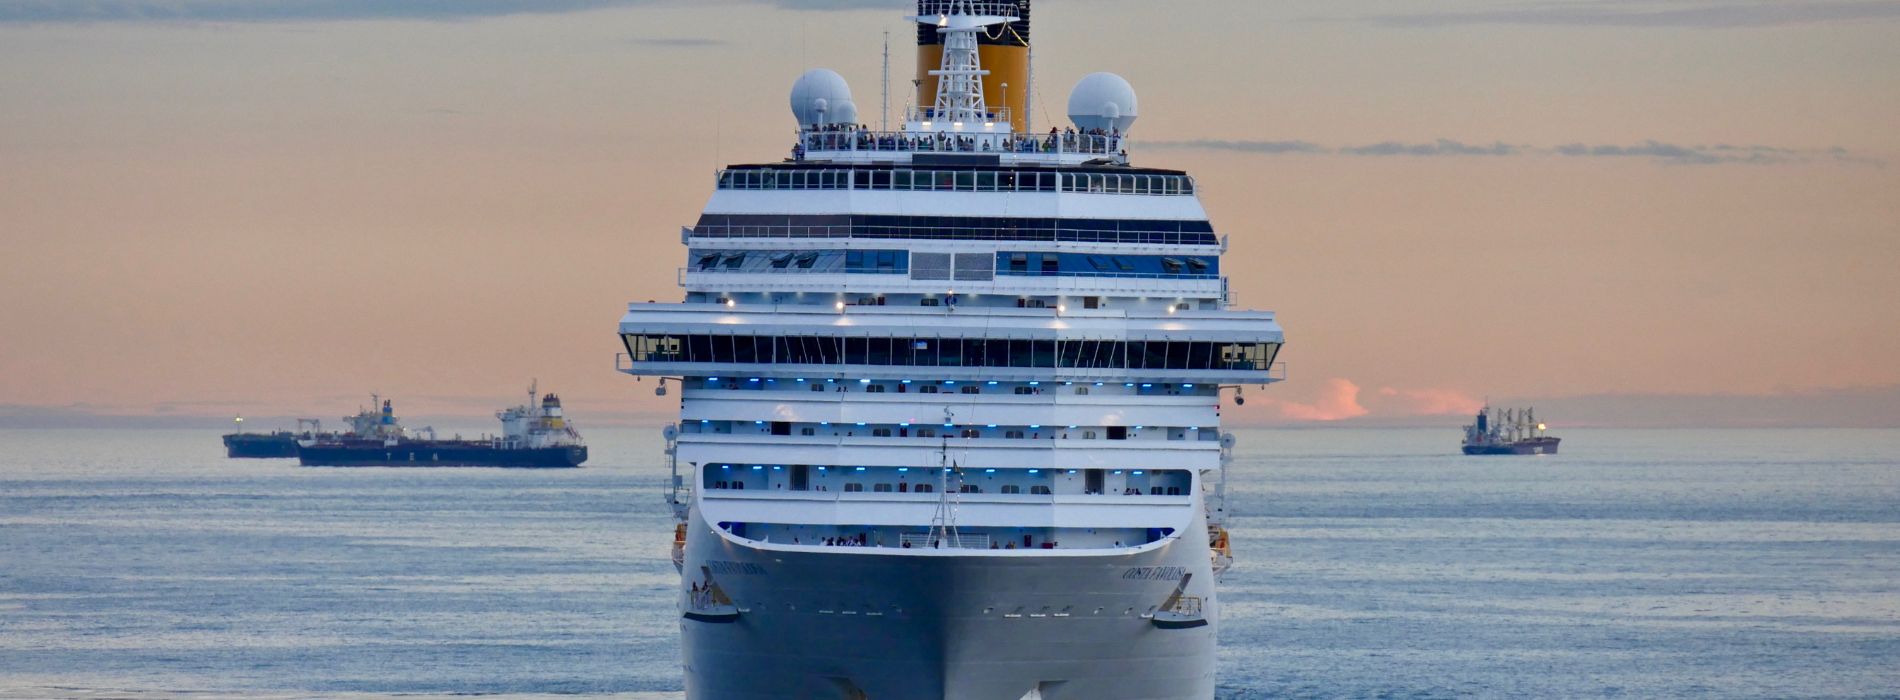 How Many Deaths on Cruise Ships Per Year? - Exploring the Safety of the Sea - Madeinsea©